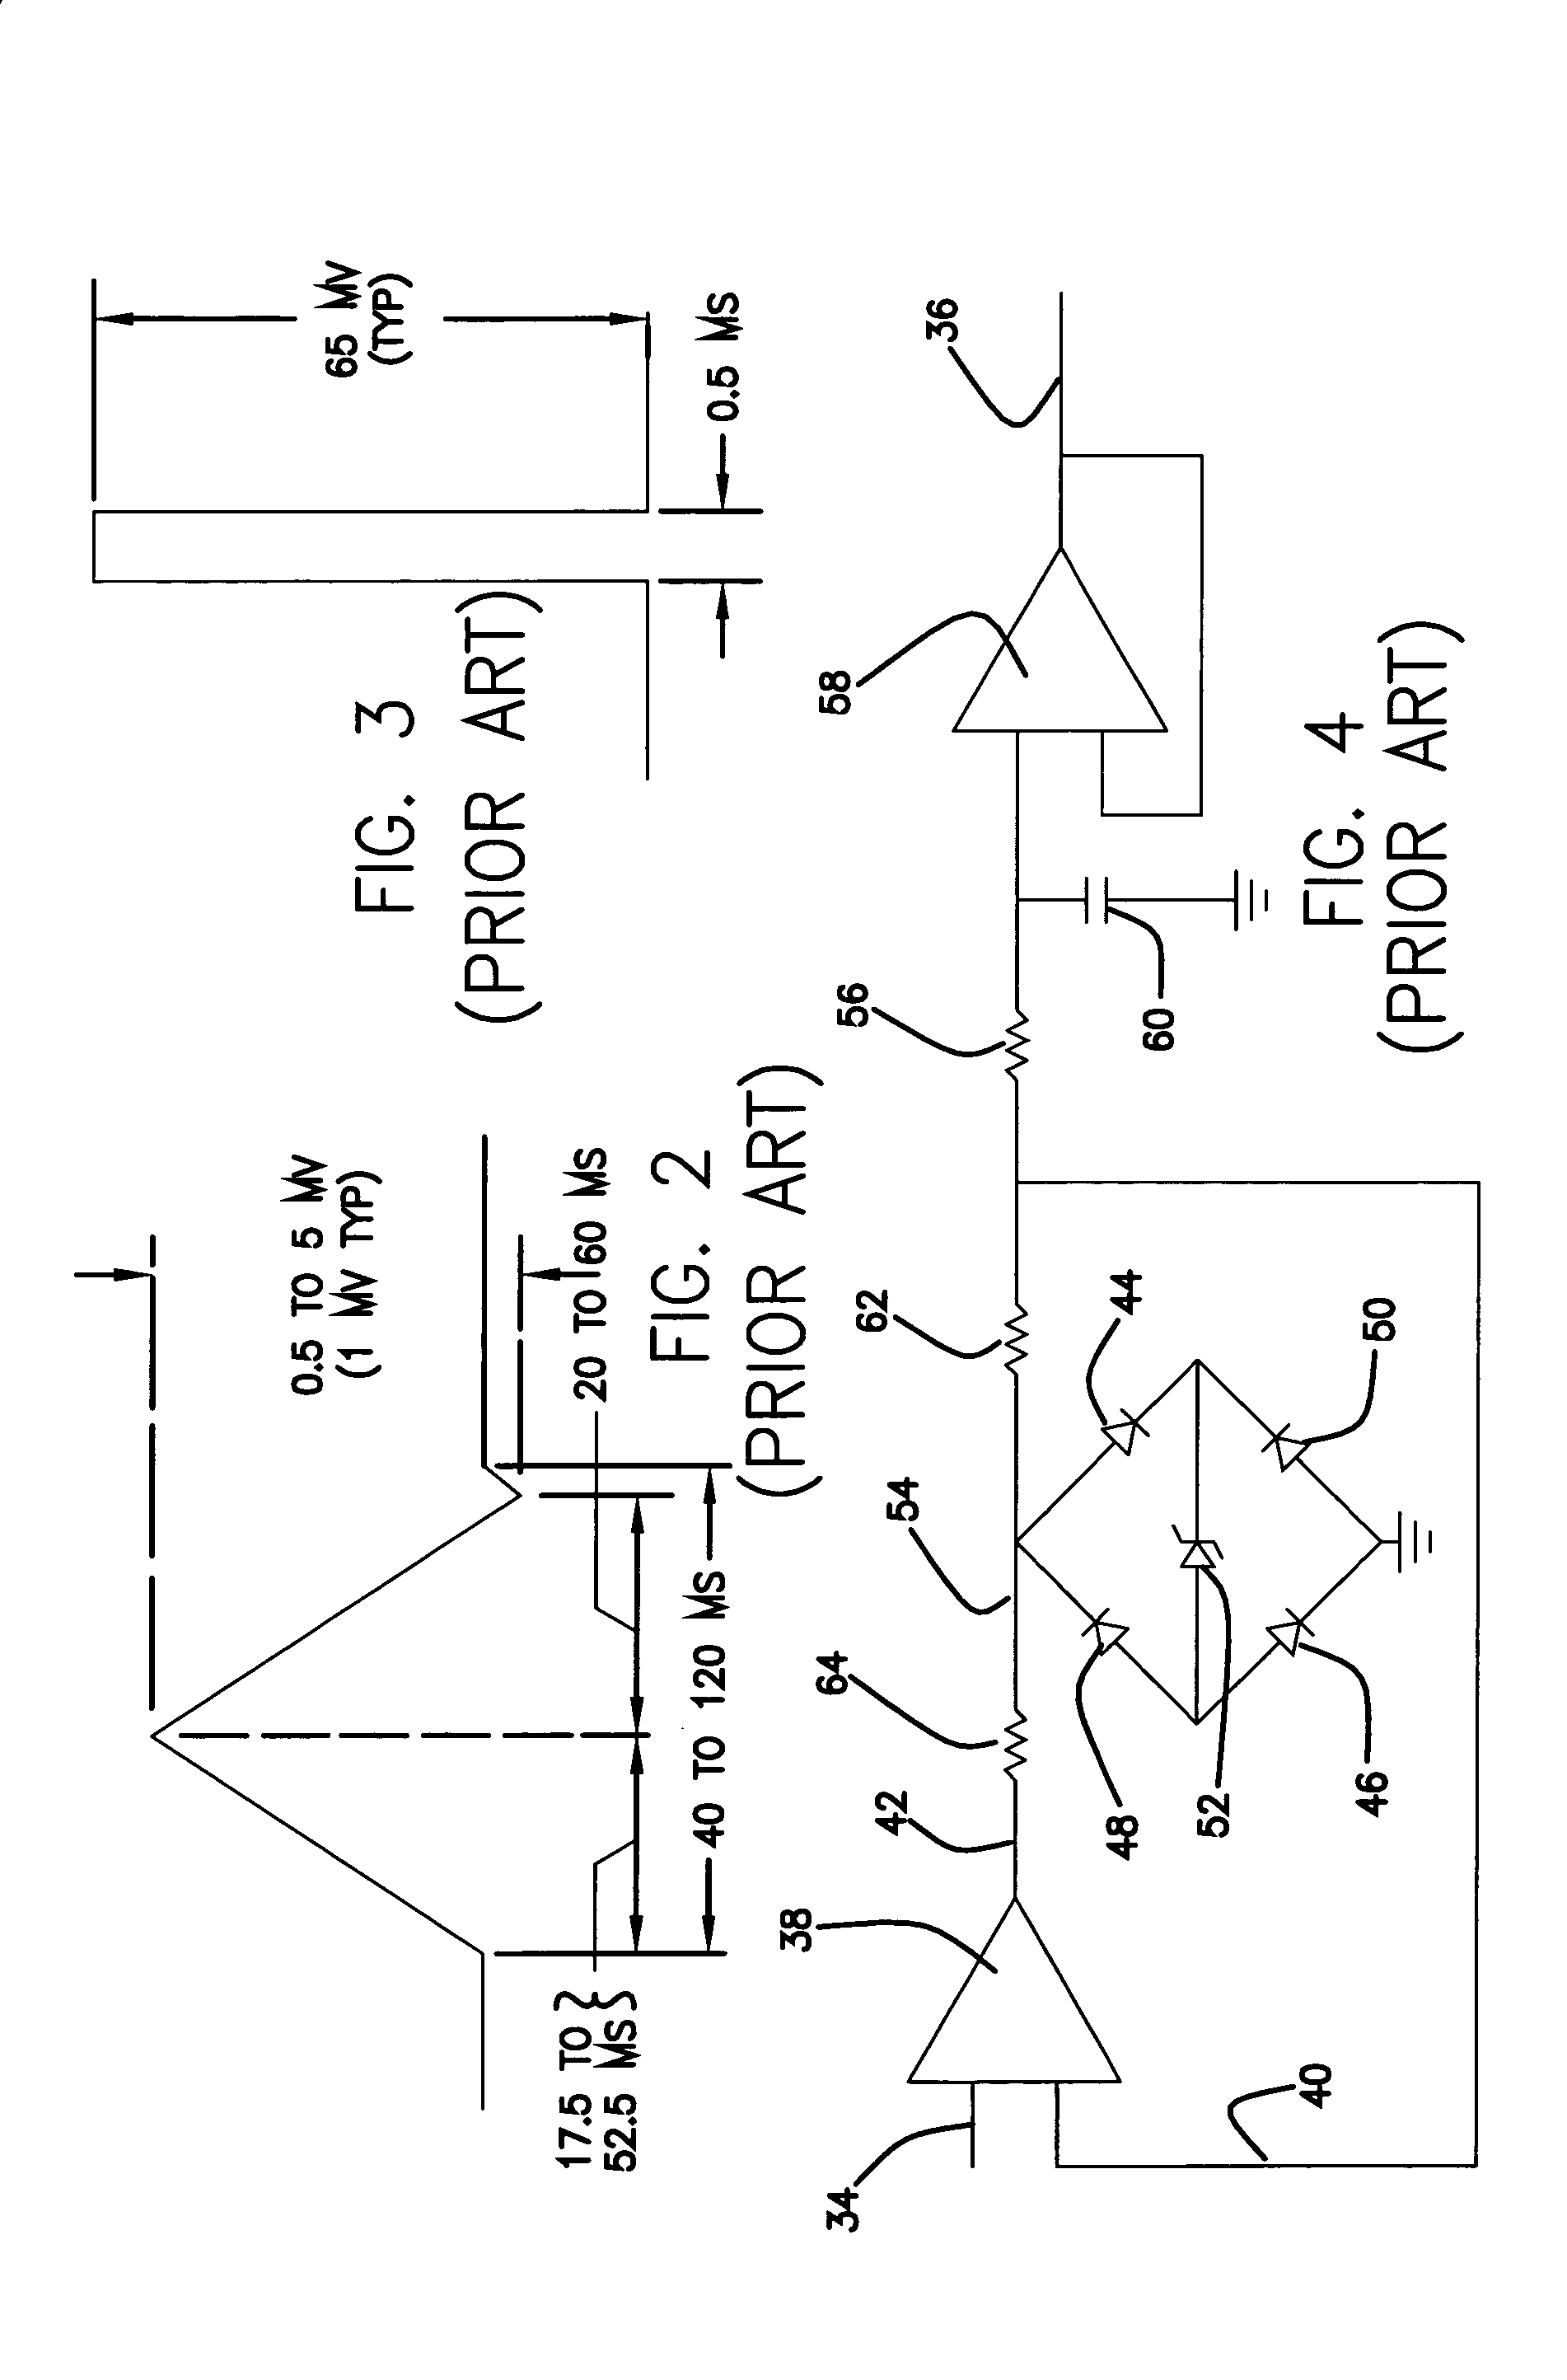 Apparatus and method for removing magnetic resonance imaging-induced noise from ECG signals